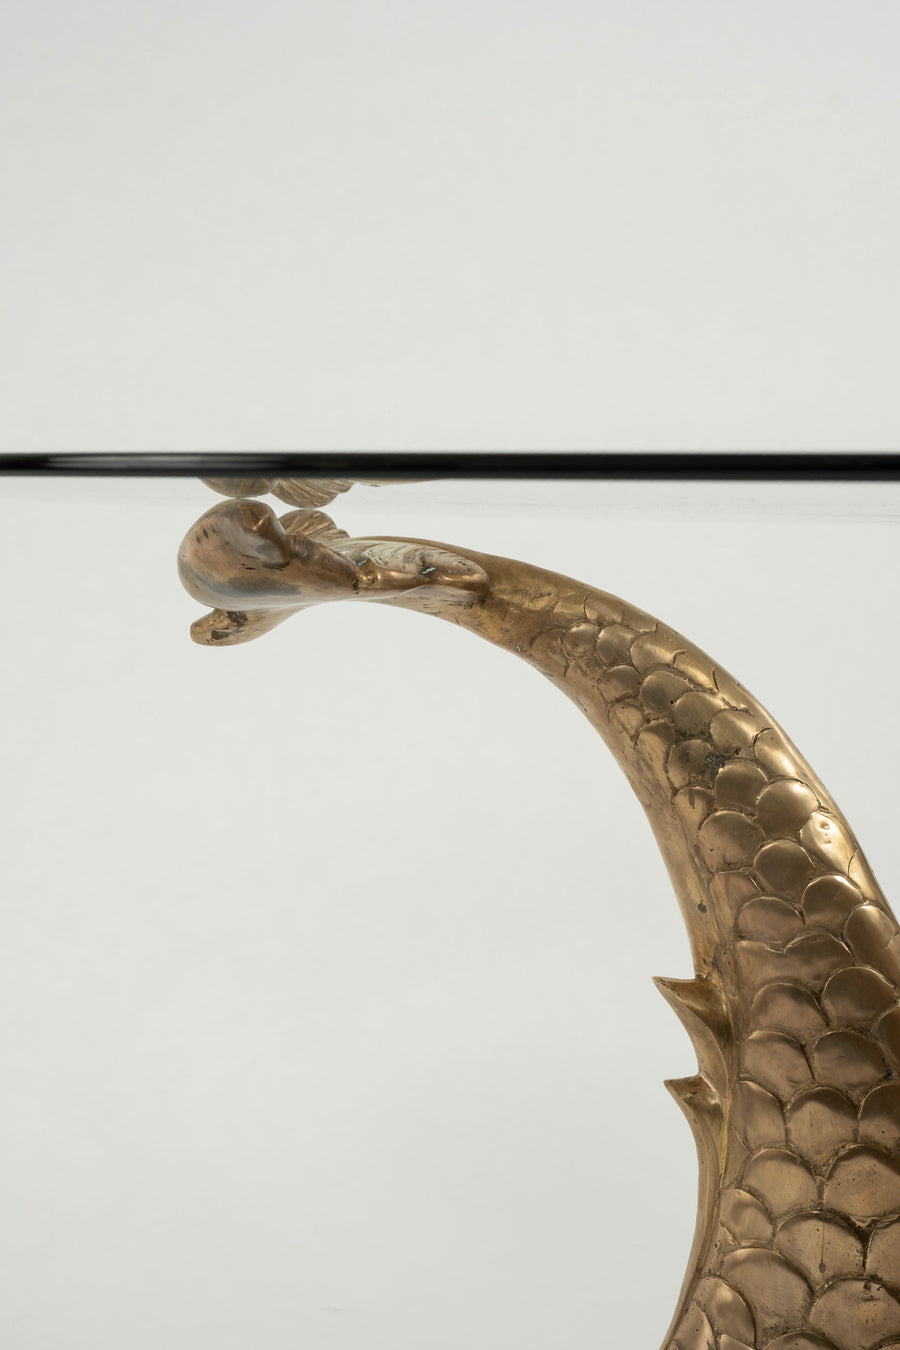 Contemporary Empire Style Brass Dolphin Table